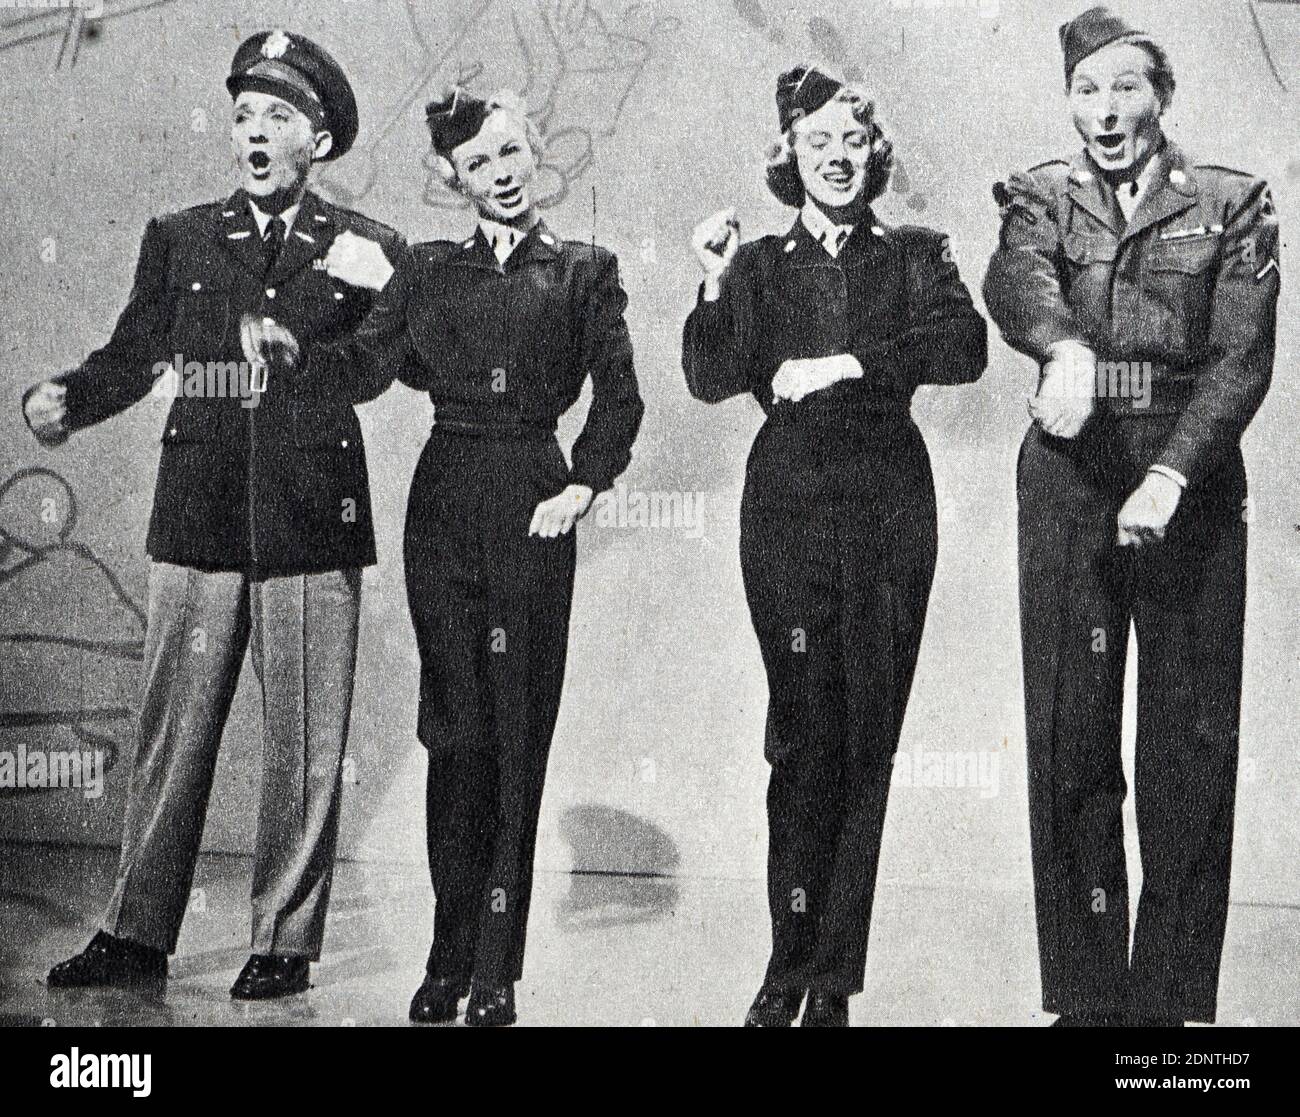 Photograph of Bing Crosby, Vera-Ellen, Rosemary Clooney, and Danny Kaye performing a number from 'White Christmas'. Stock Photo